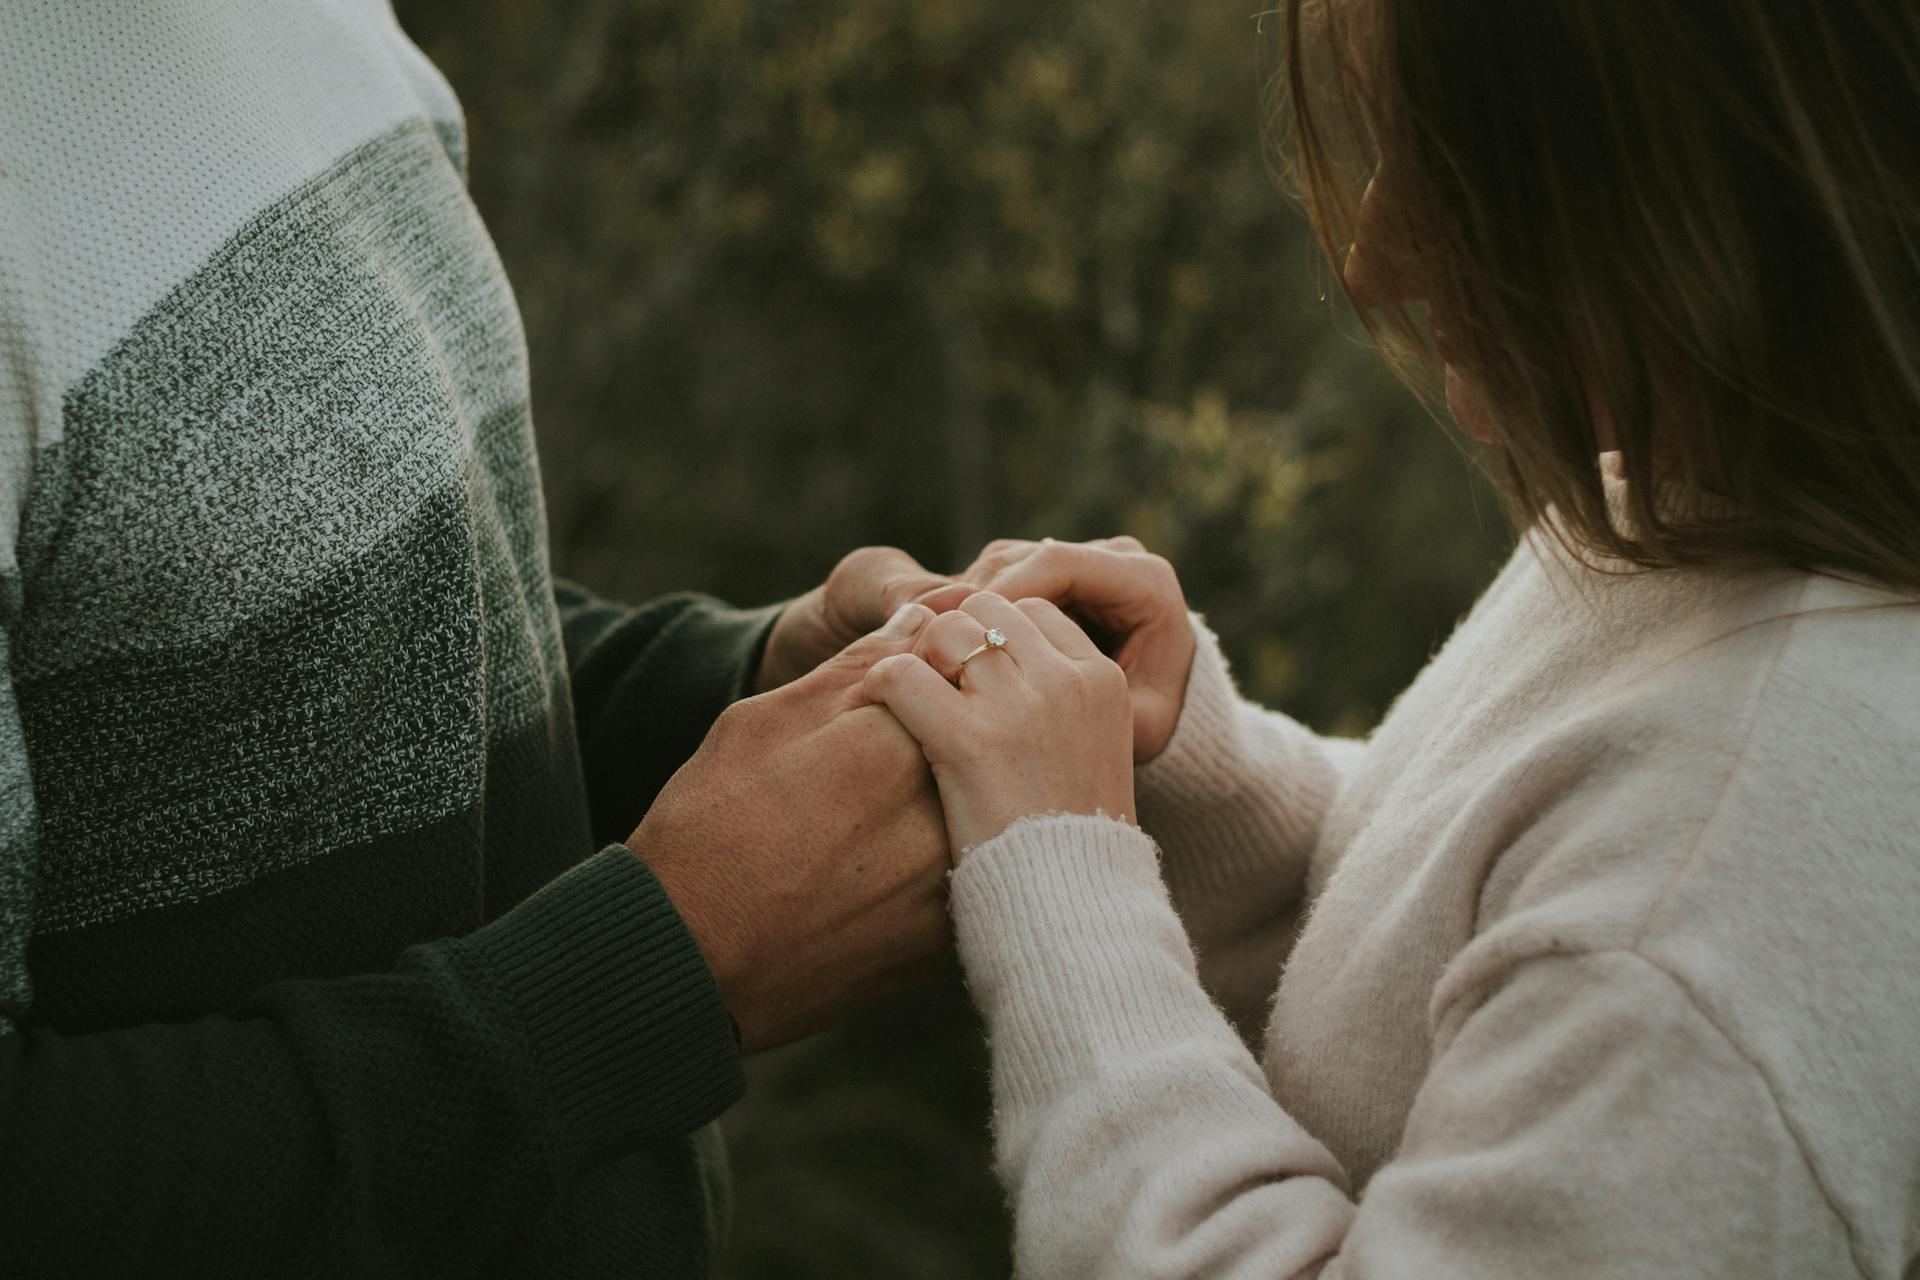 A man holding a woman's hands | Source: Pexels